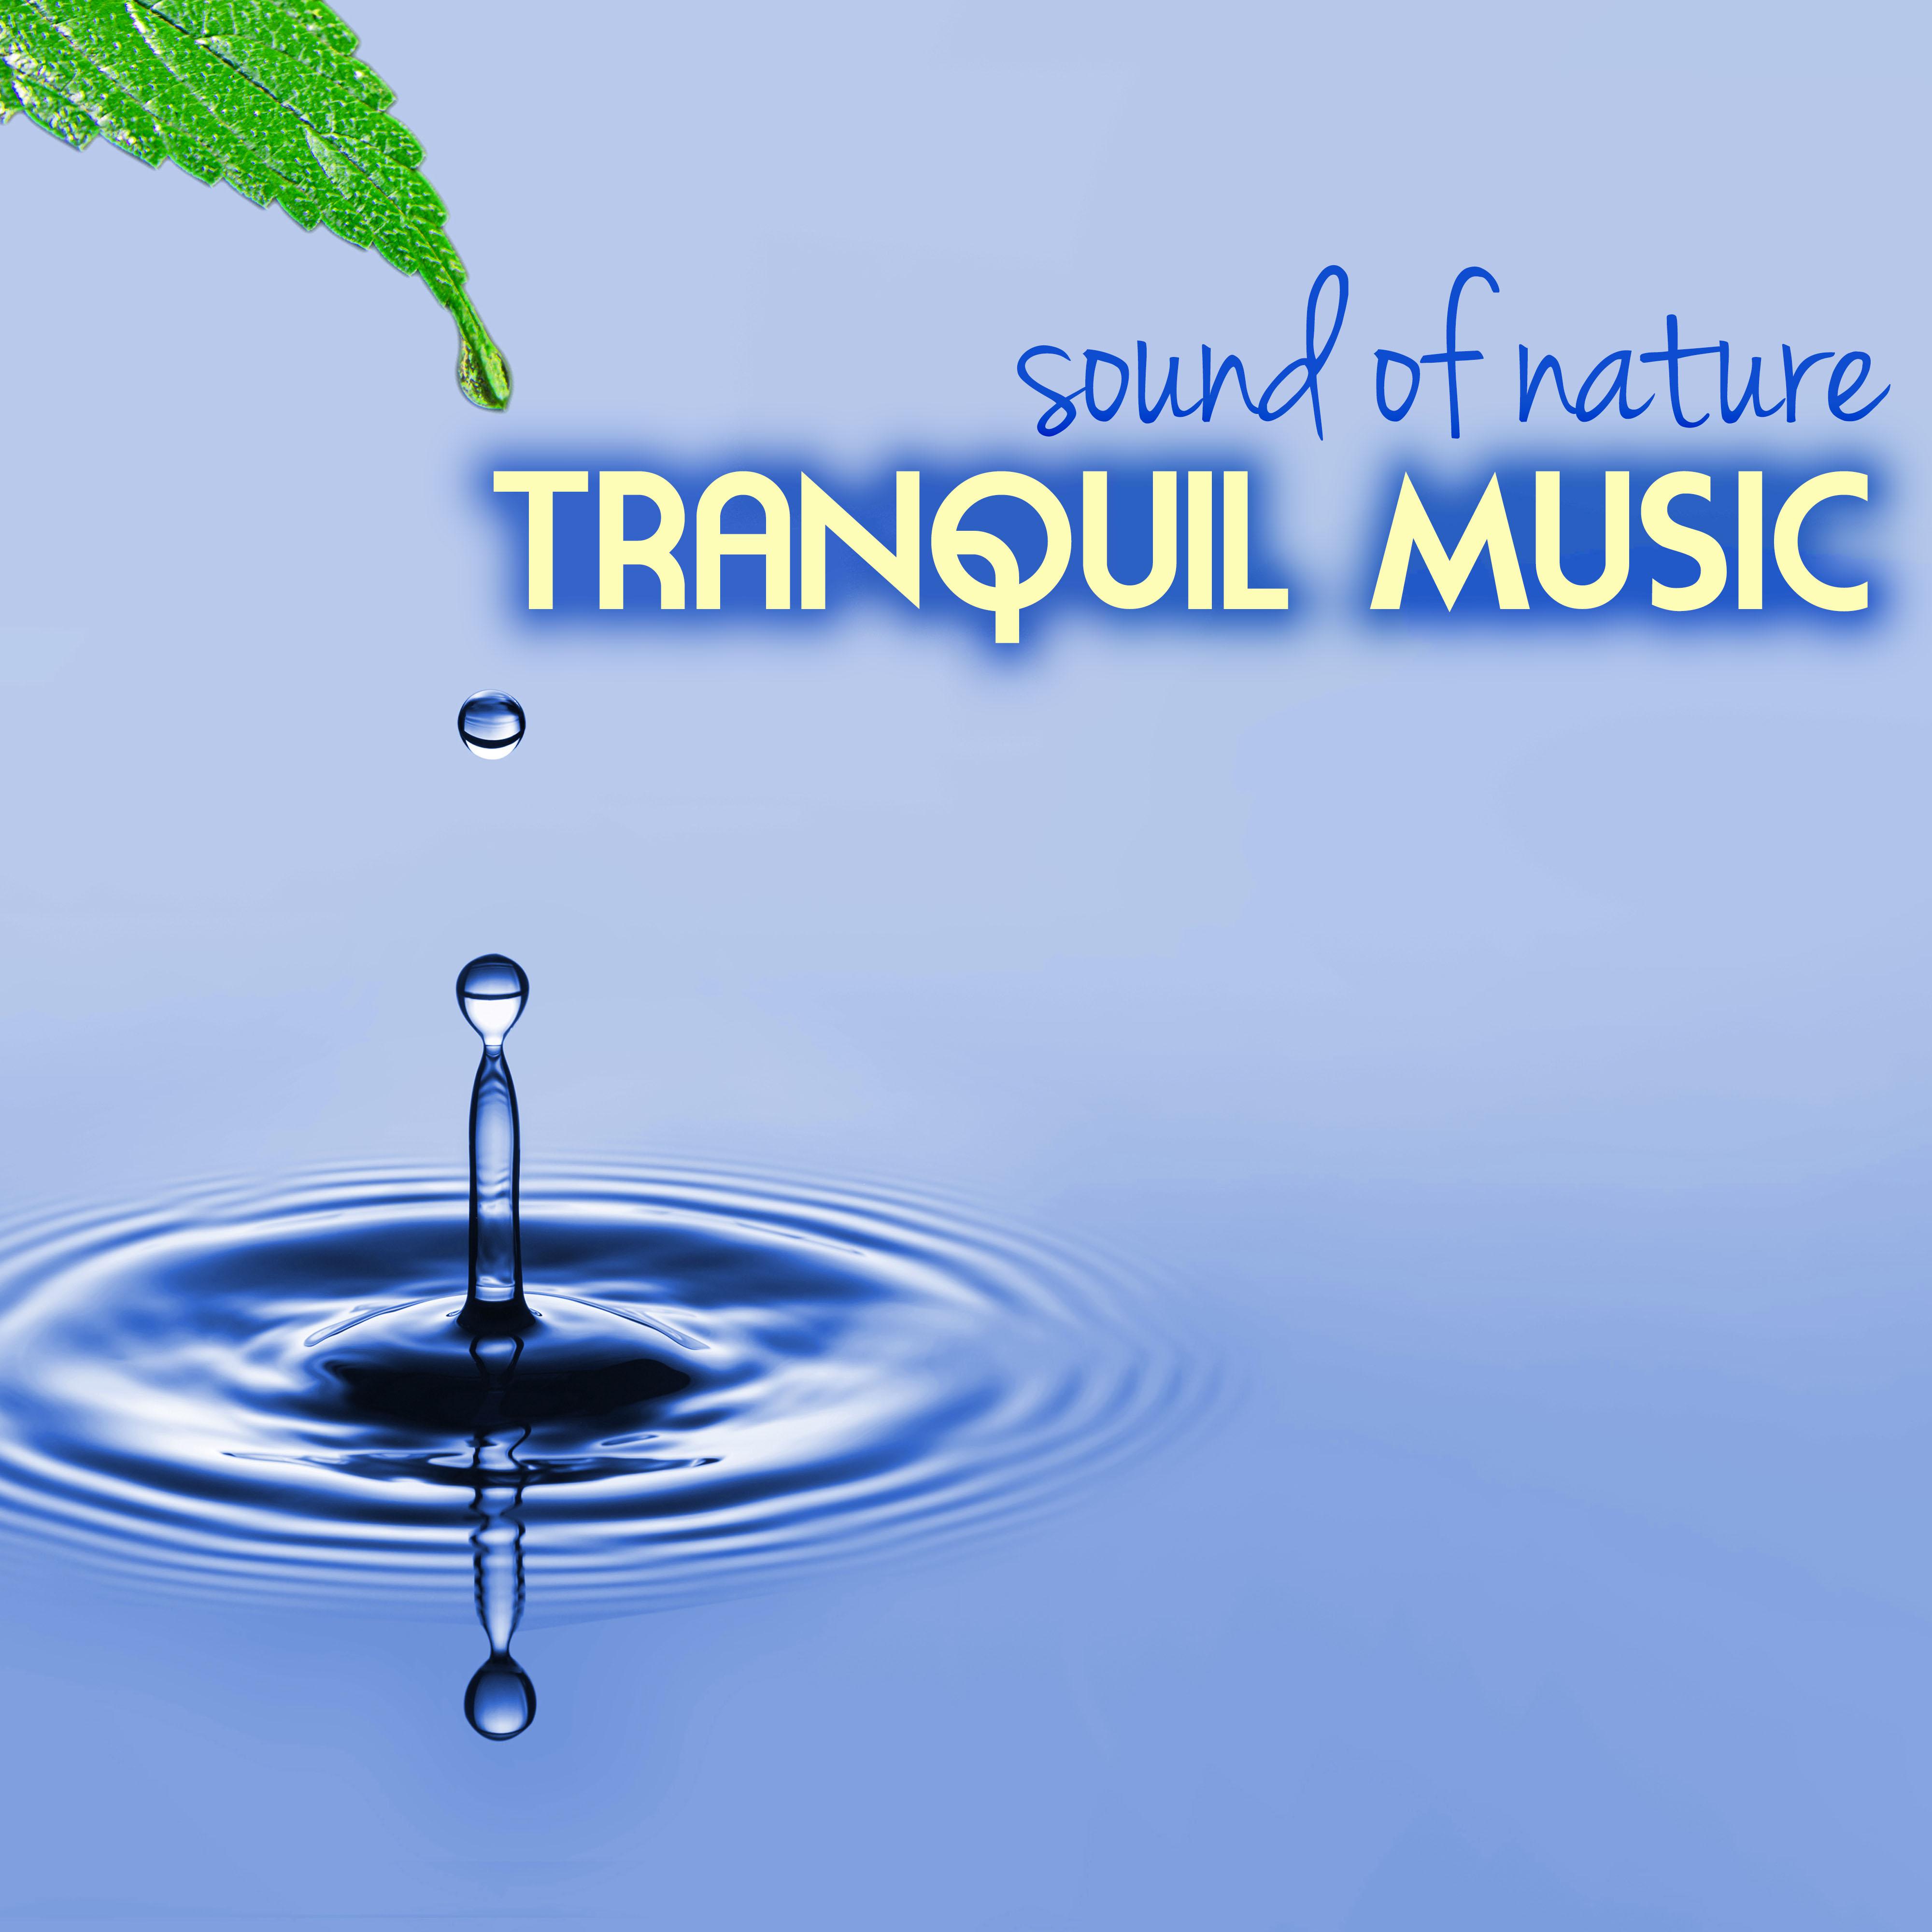 Believe in Me - Tranquil Music